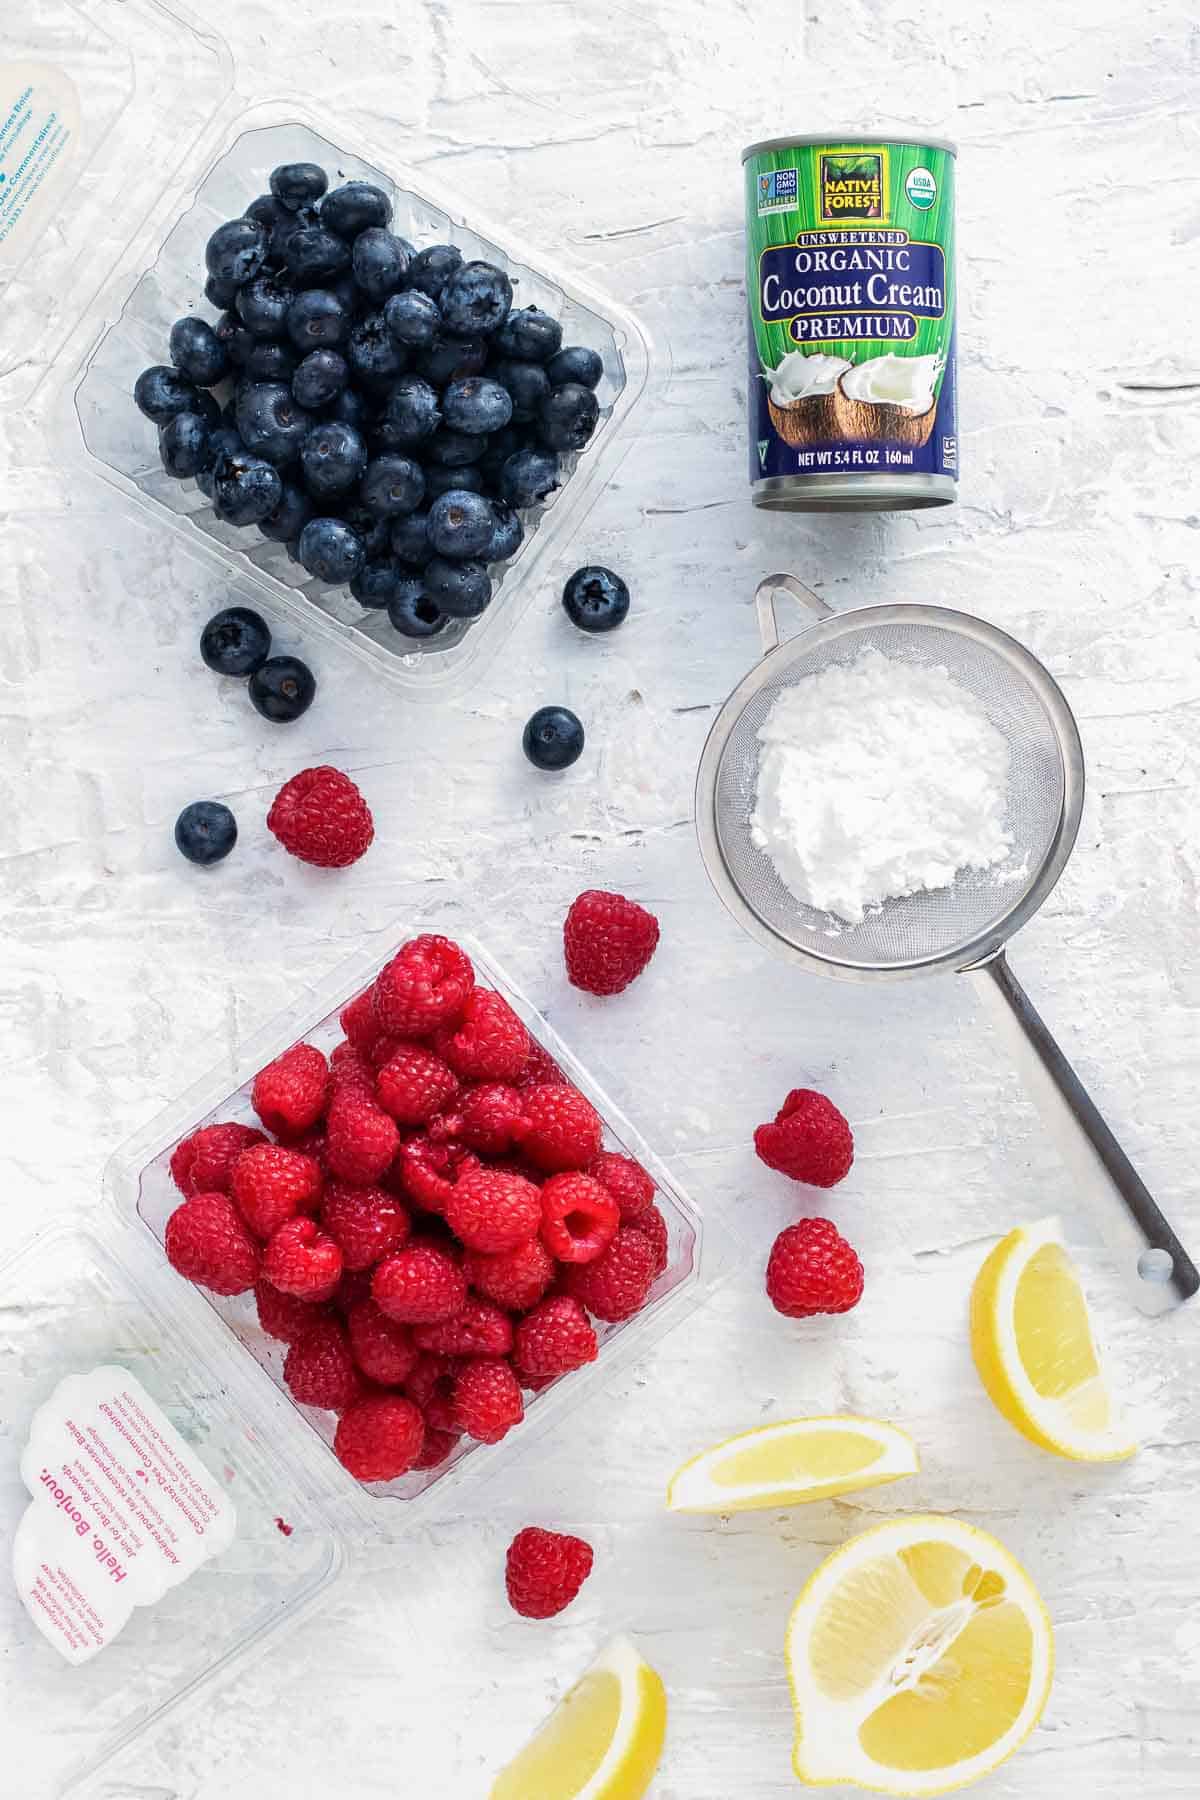 Blueberries, raspberries, coconut cream, powdered sugar, and fresh lemons and topping ideas for pancakes.